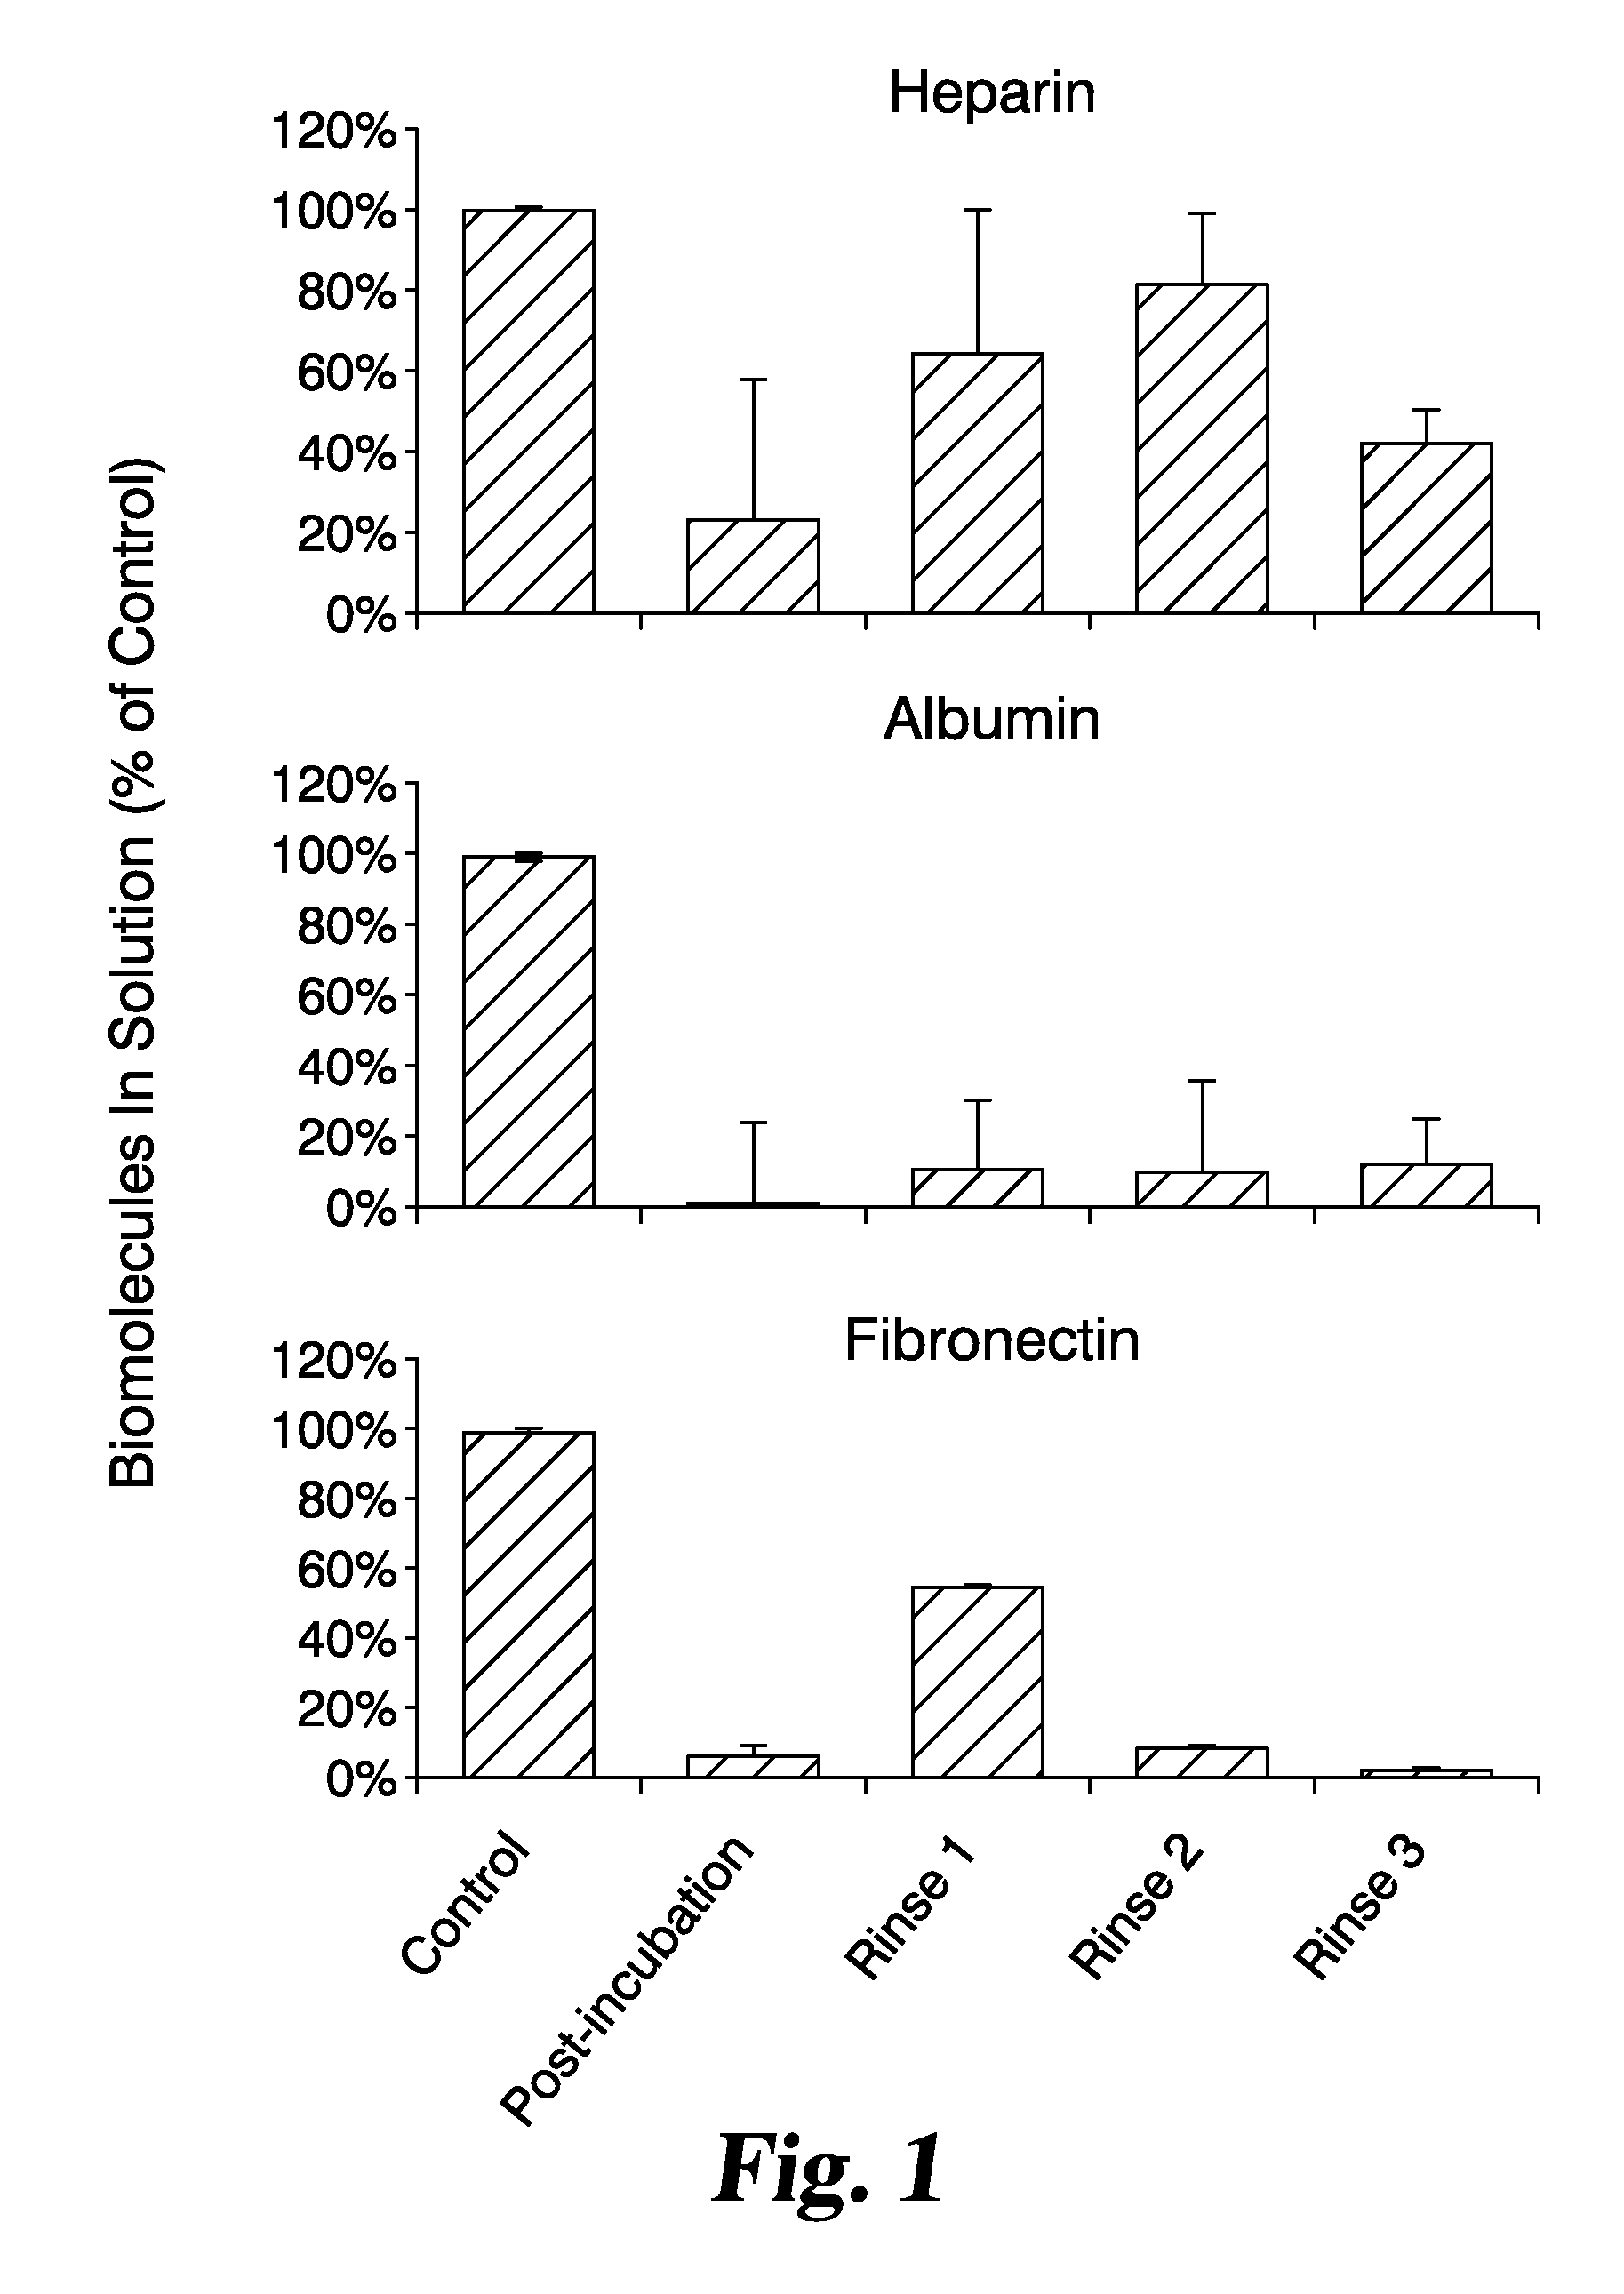 Fibronectin-modified ecm tissue graft constructs and methods for preparation and use thereof